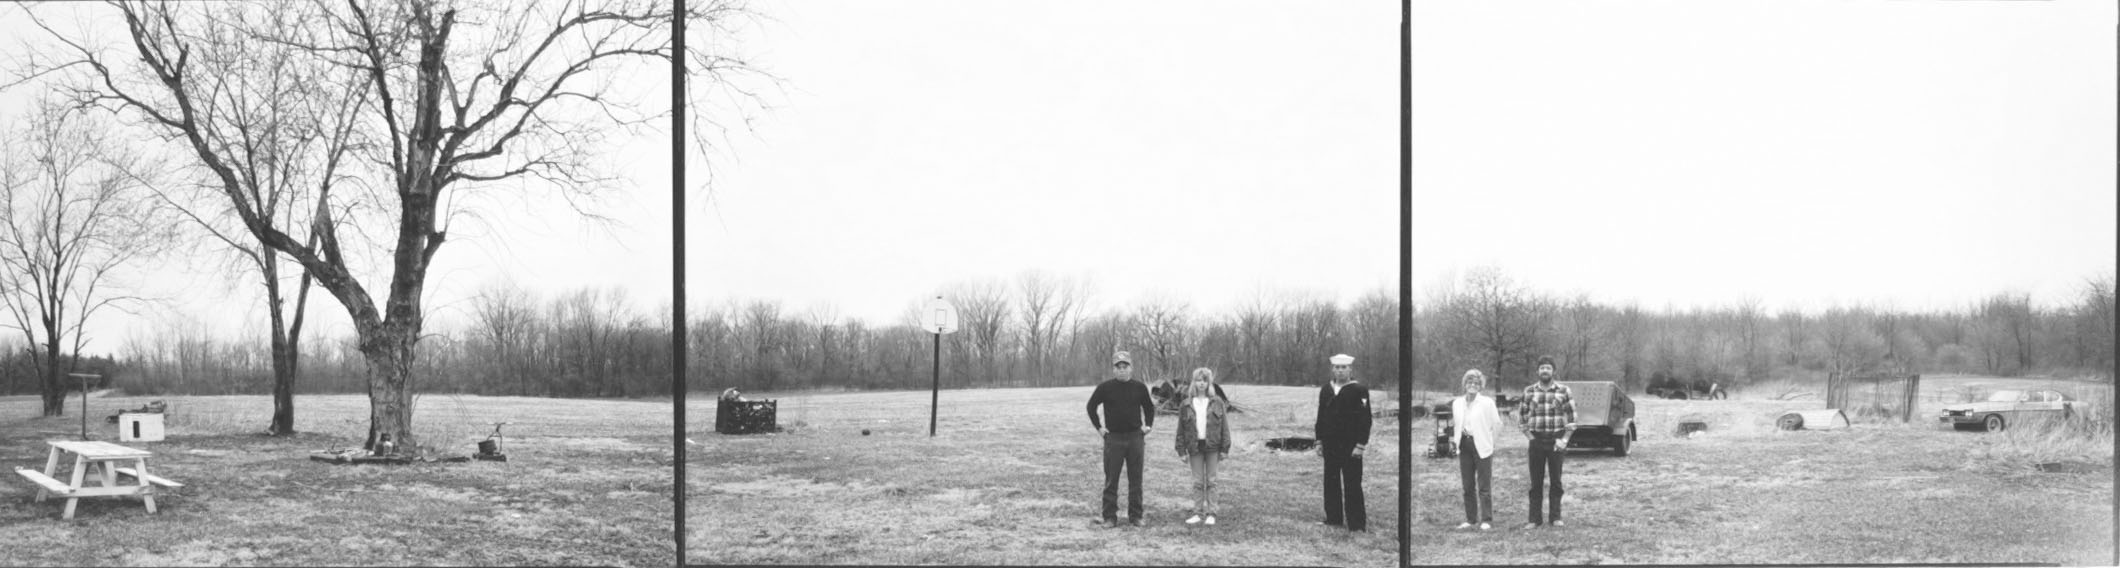 Untitled #1325, from Farm Families Project